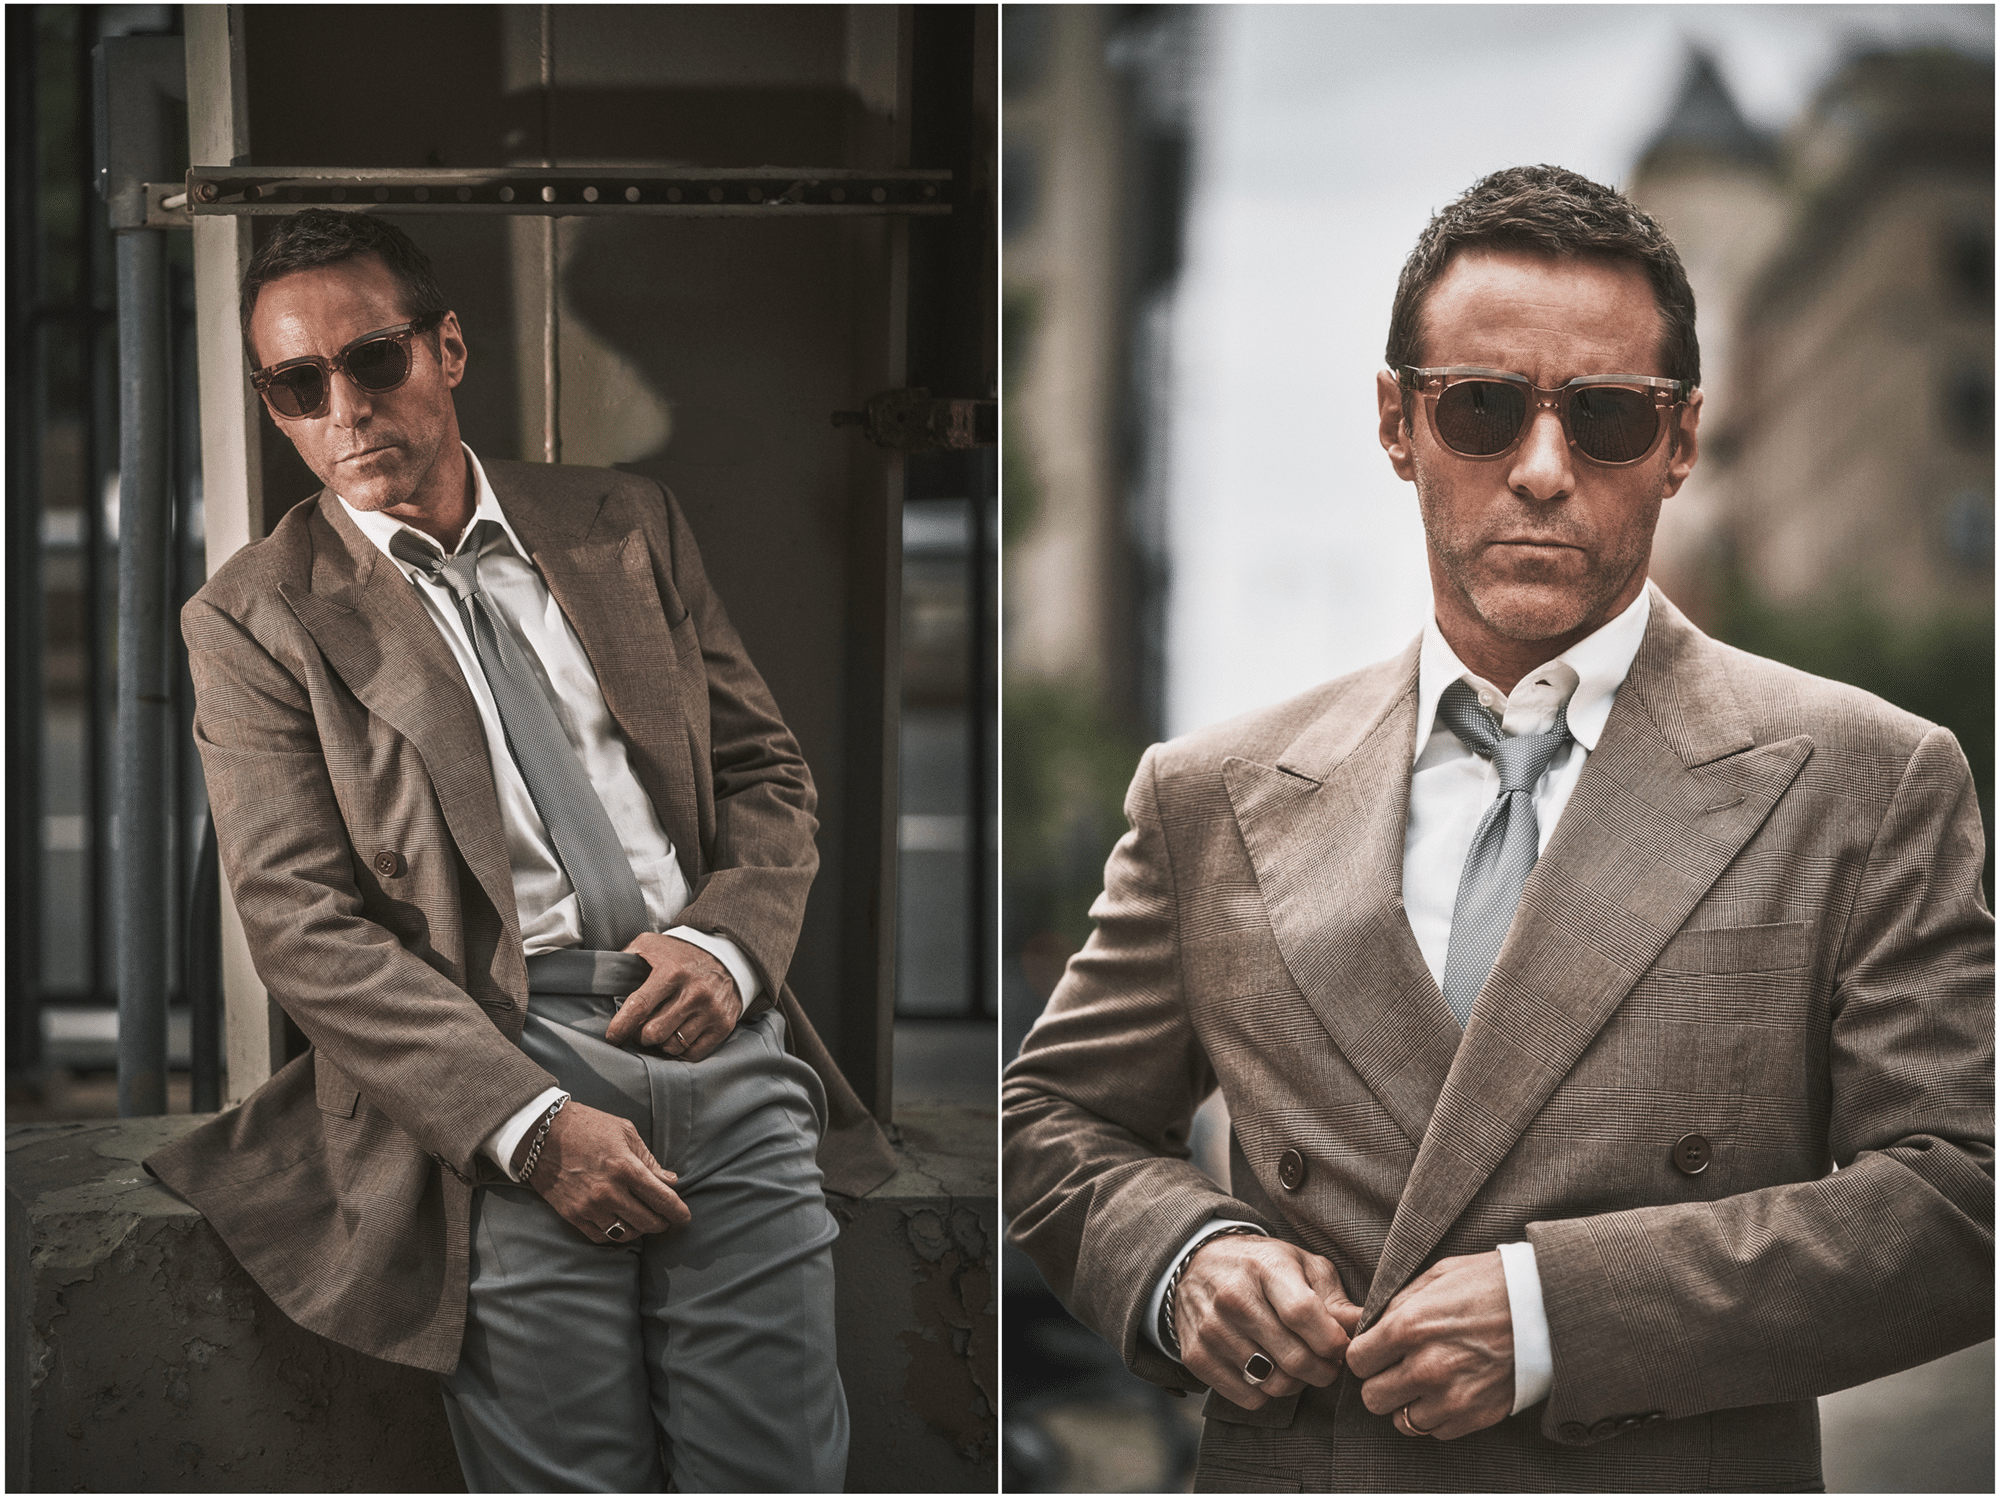 Jacket, shirt, tie, and pants by RALPH LAURENPURPLE LABEL; sunglasses by JACQUES MARIE MAGE.